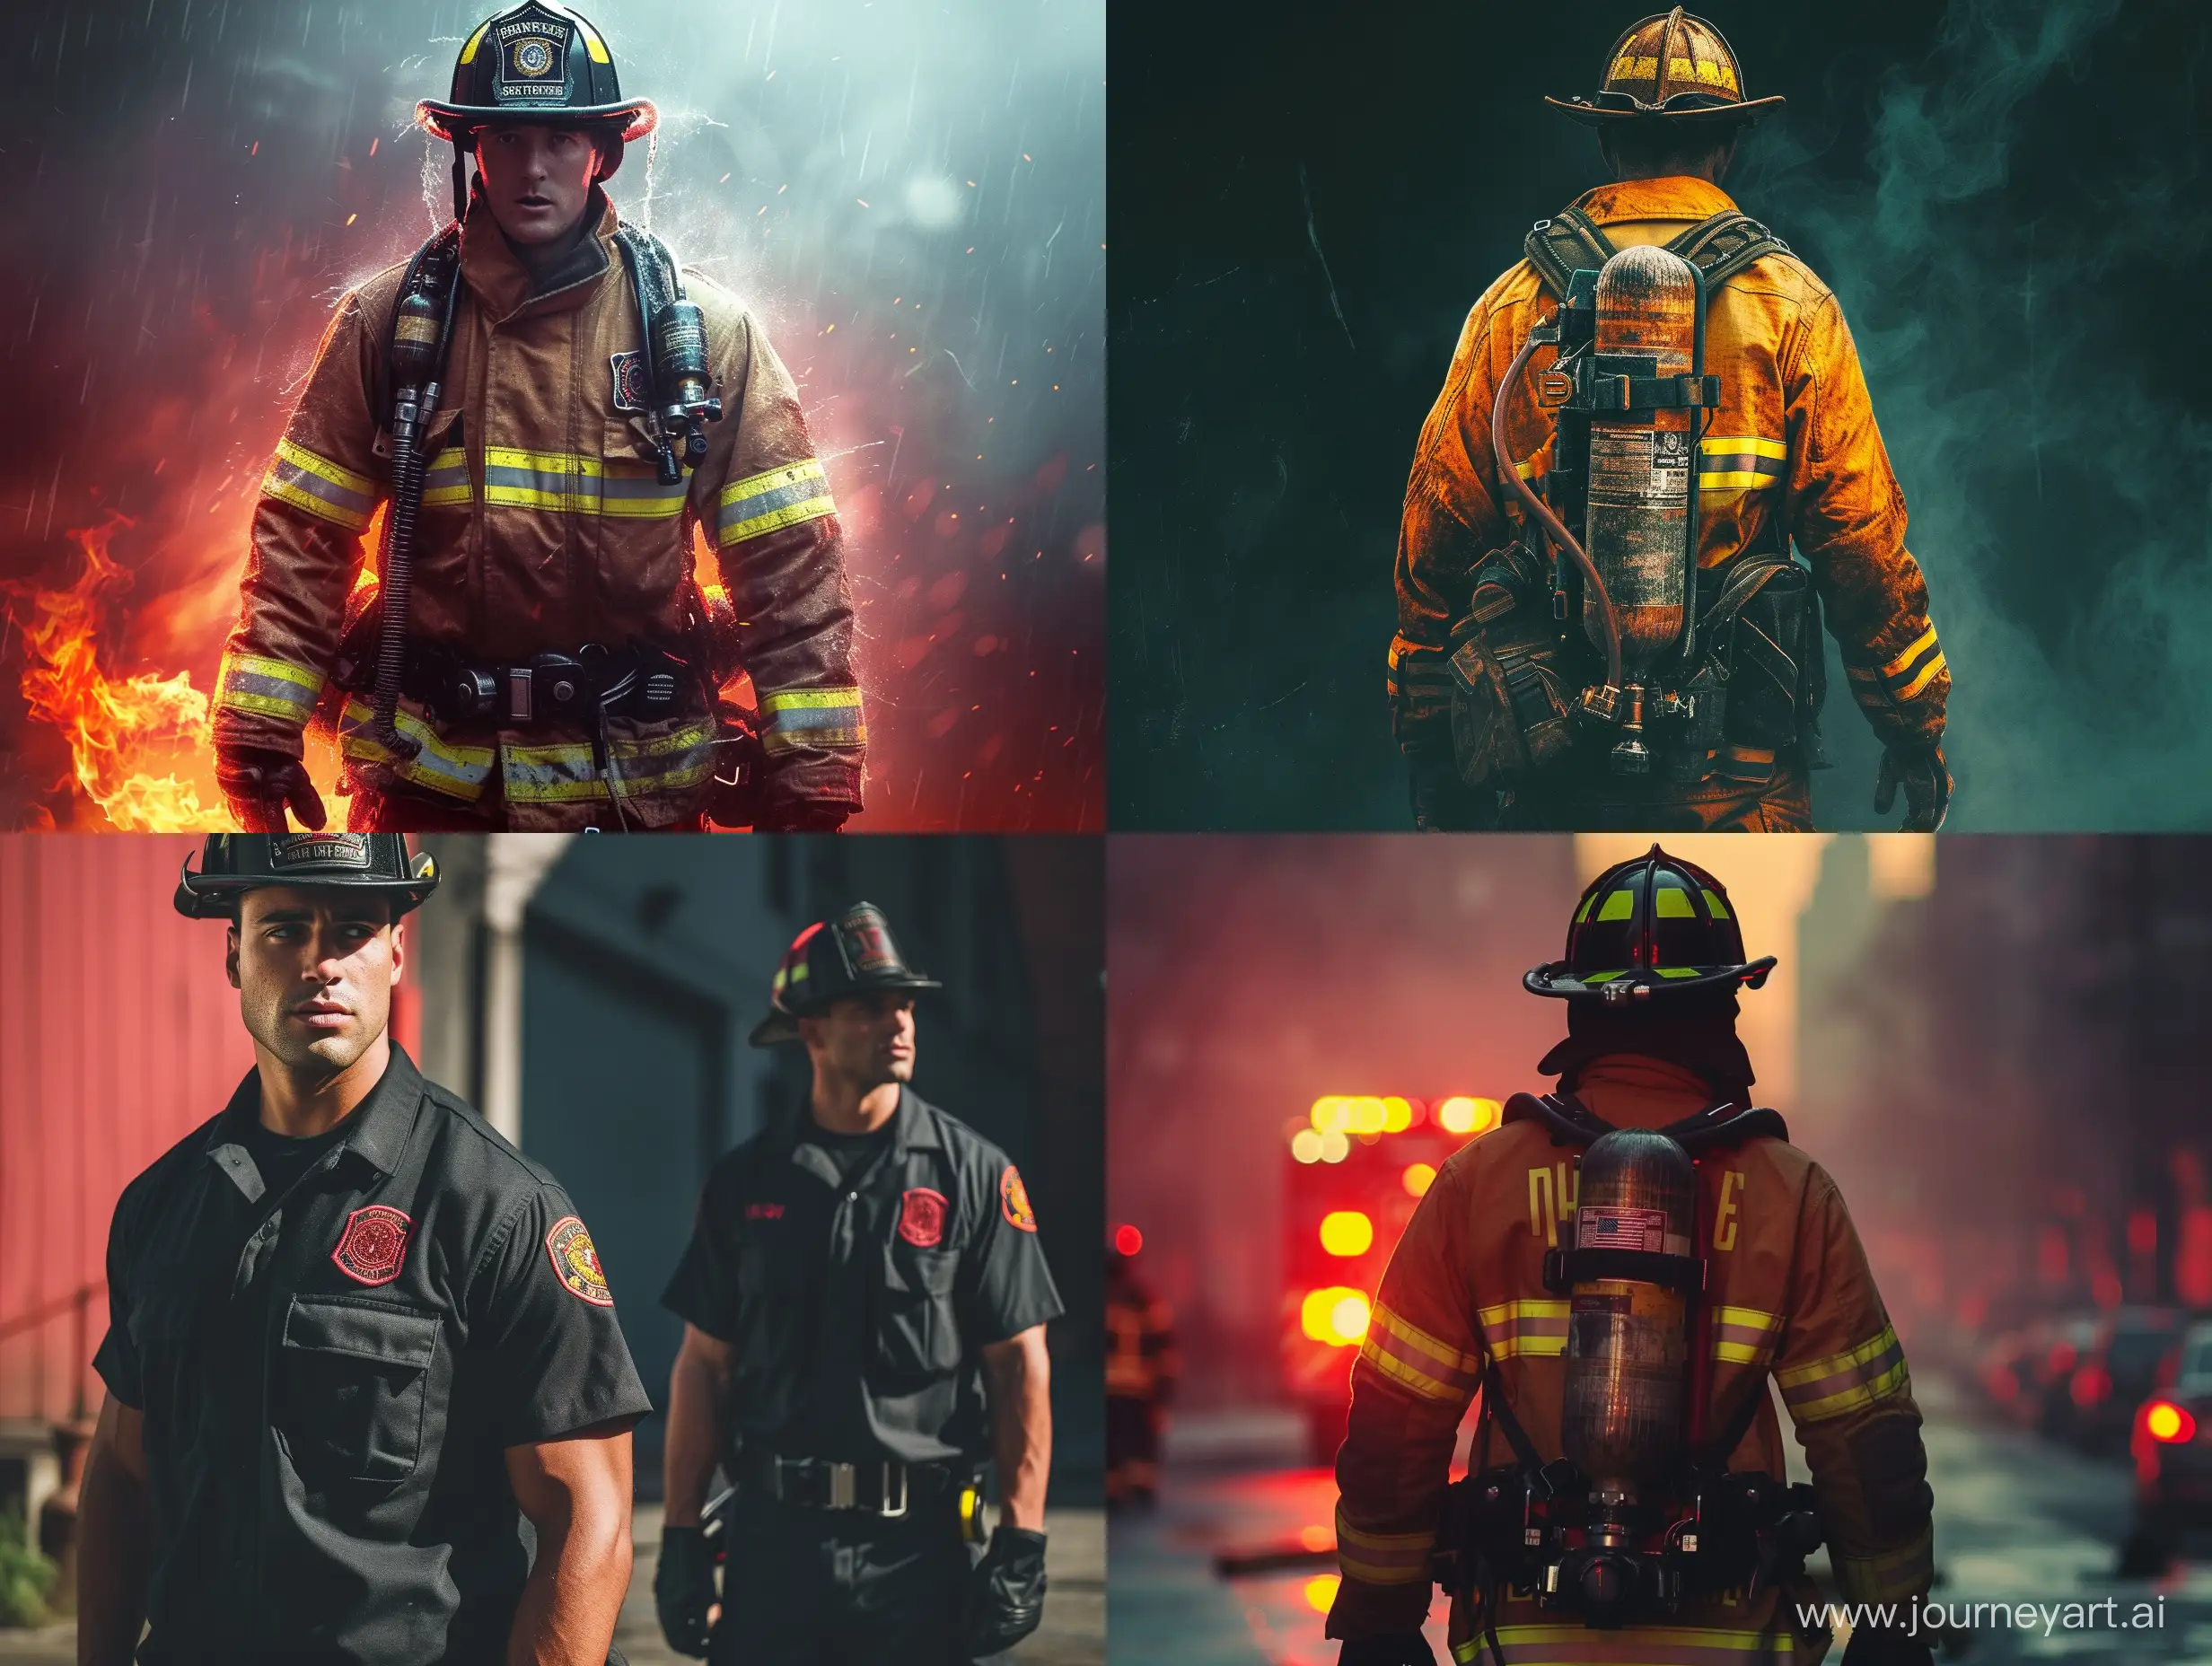 Bold-Firefighter-Shirt-Vibrant-Design-with-a-64-Aspect-Ratio